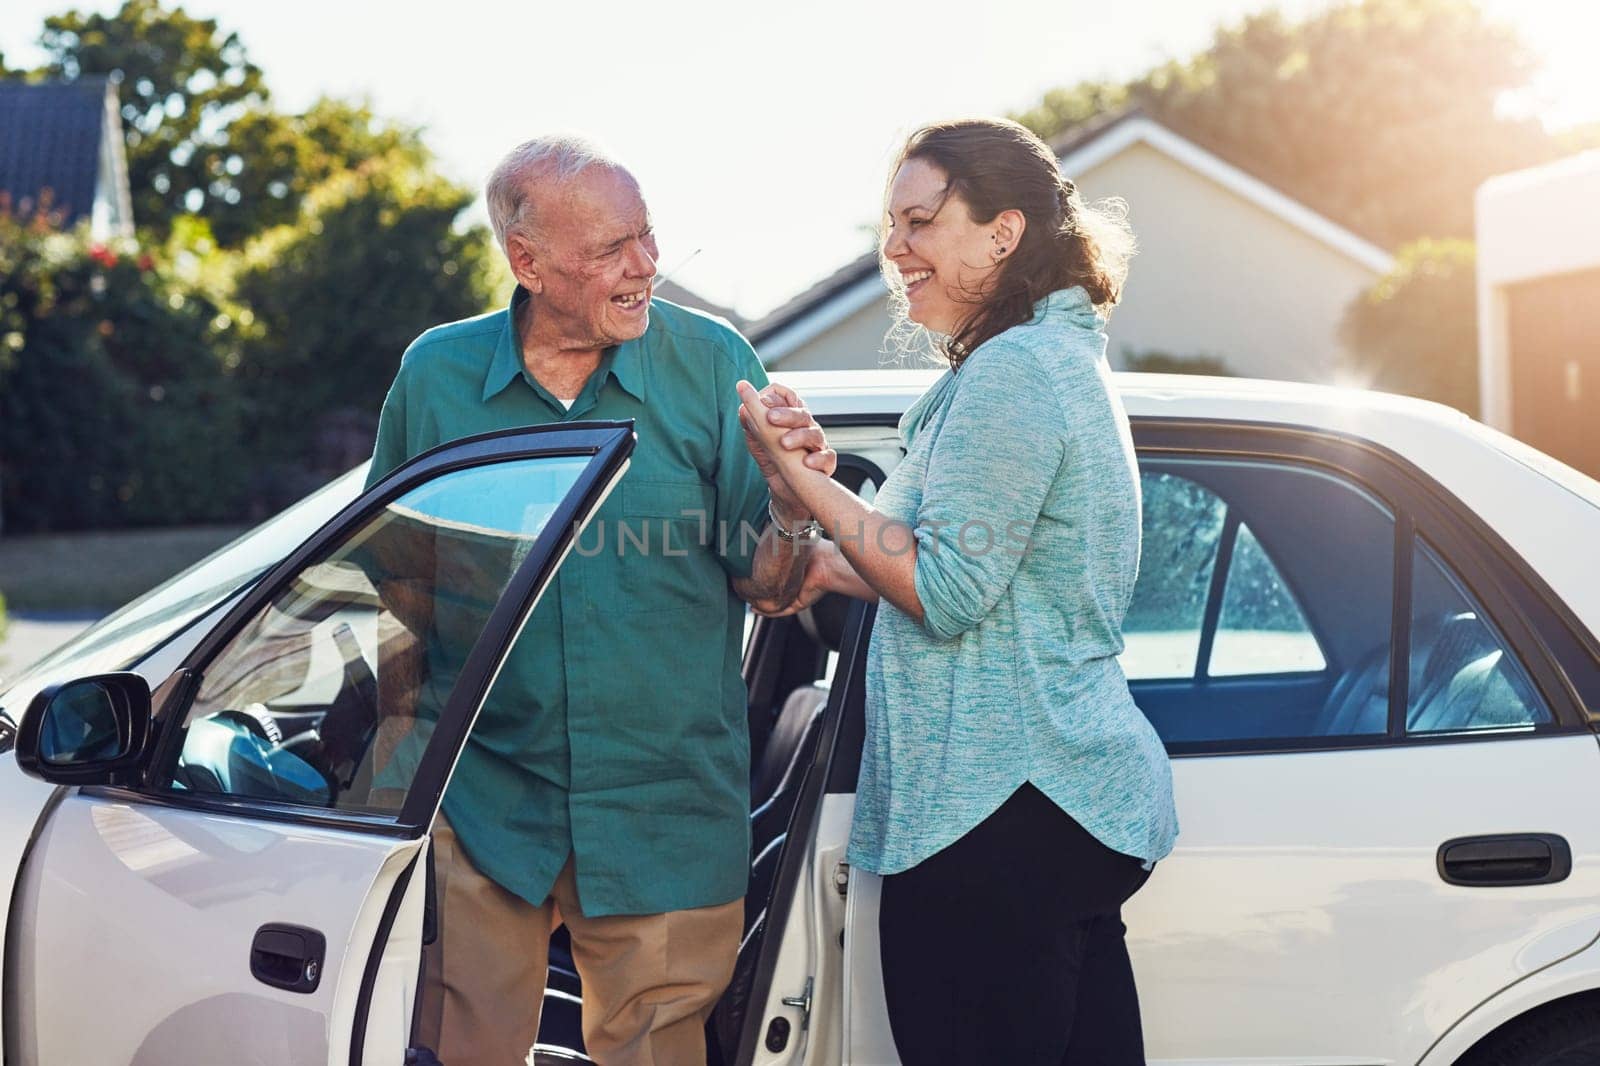 Car, help and caregiver woman with old man for assisted living, retirement care and rehabilitation. Travel, transportation and female helping elderly male person from motor vehicle for health service.